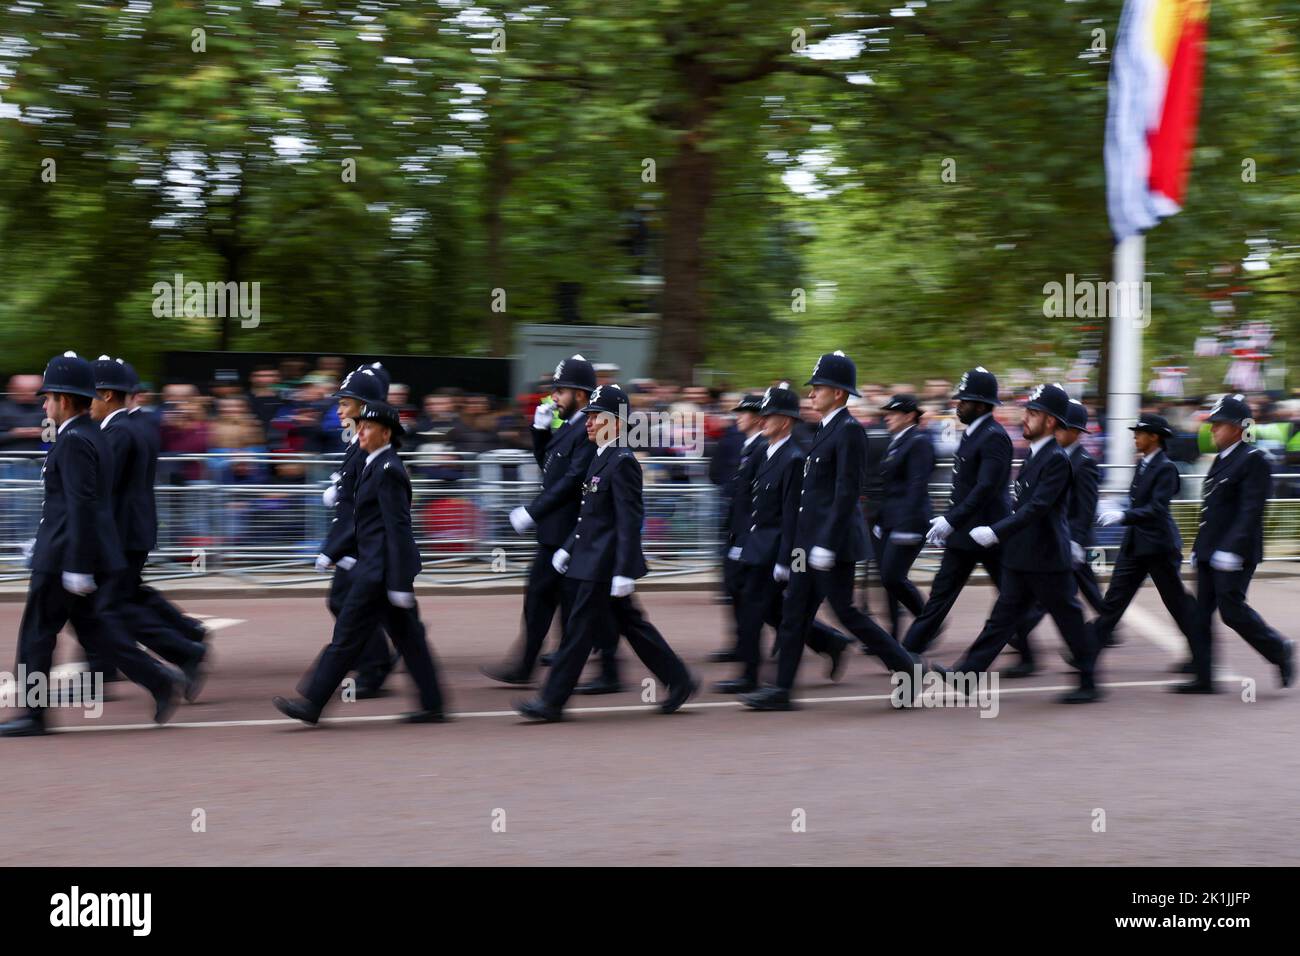 Police officers prepare on the day of the state funeral and burial of Britain's Queen Elizabeth, in London, Britain, September 19, 2022. REUTERS/Tom Nicholson Stock Photo